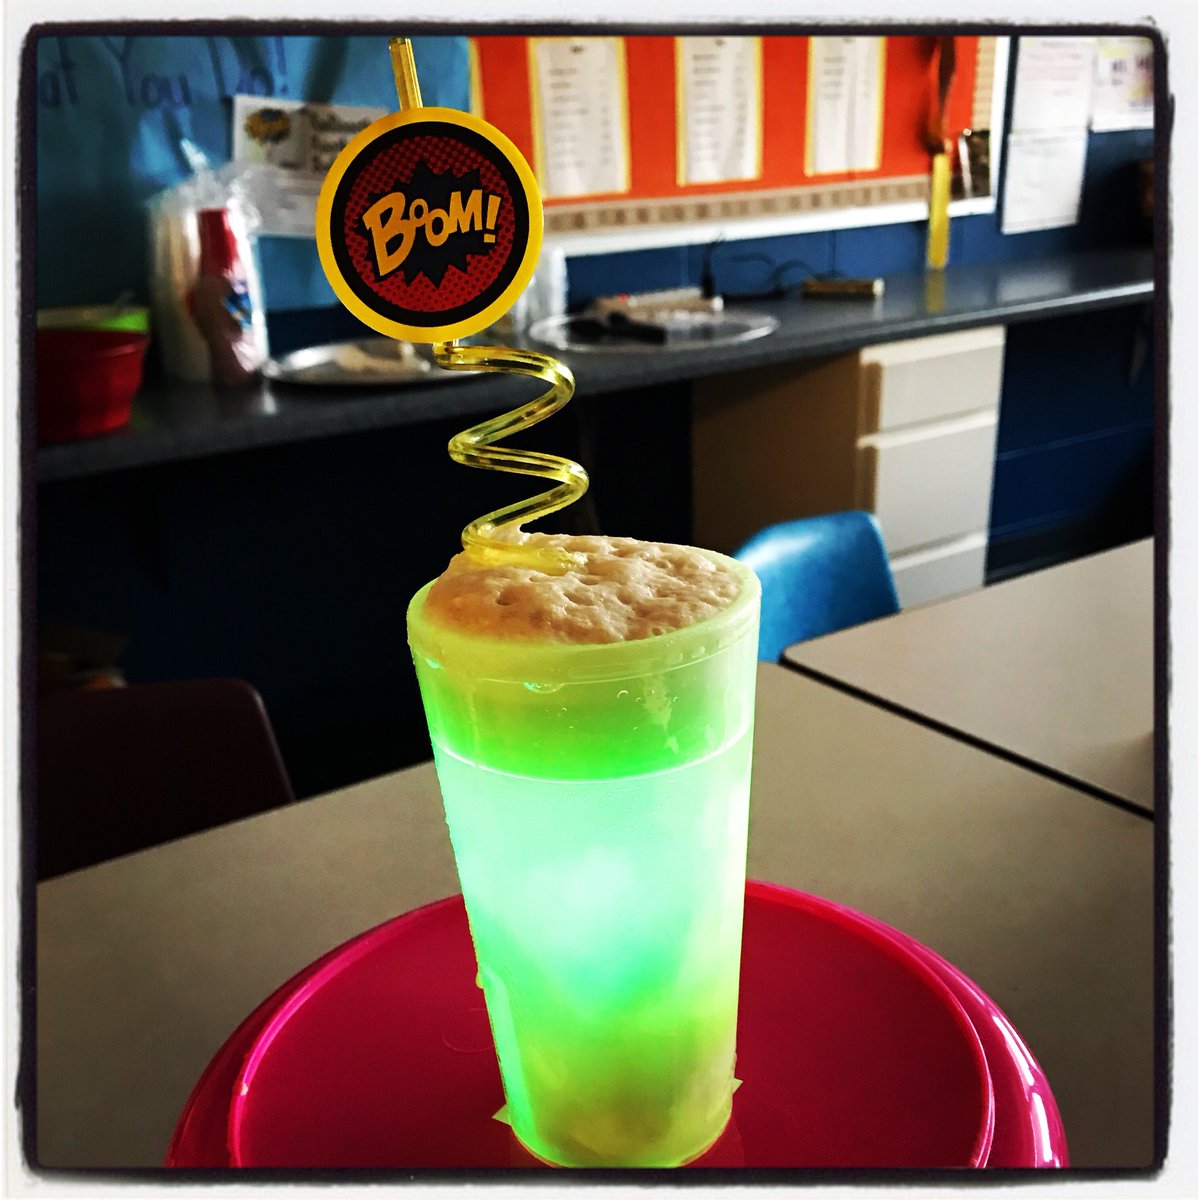 Radioactive Rootbeer floats for Teacher Appreciation Week...ahhh these are so cute!! It has been so fun this week planning how to appreciate our wonderful teachers for what they do teaching our kids daily! Thank you @westvikings teachers! #westisbest #ThankaMOTeacher #cpsbest